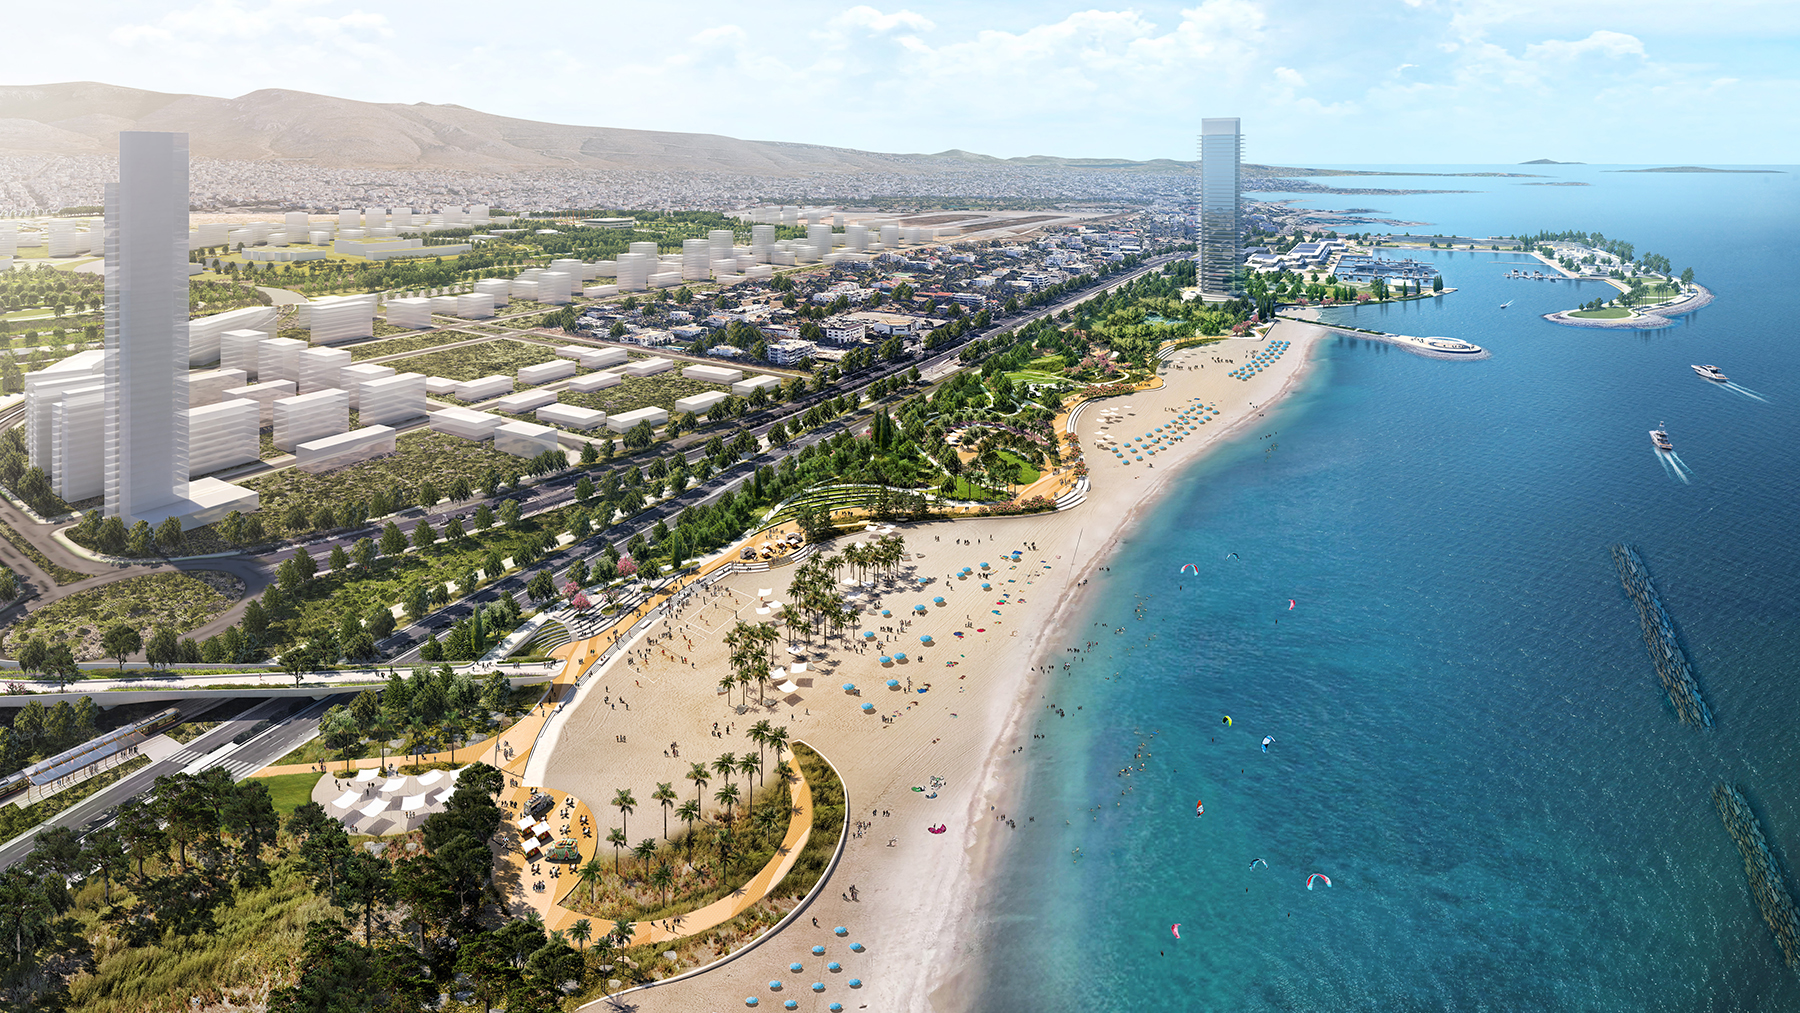 Almost 2 km of coastline on the property serves as a public beach for visitors as well as megayacht marina, which is pictured in the back right. (Rendering courtesy of Sasaki)